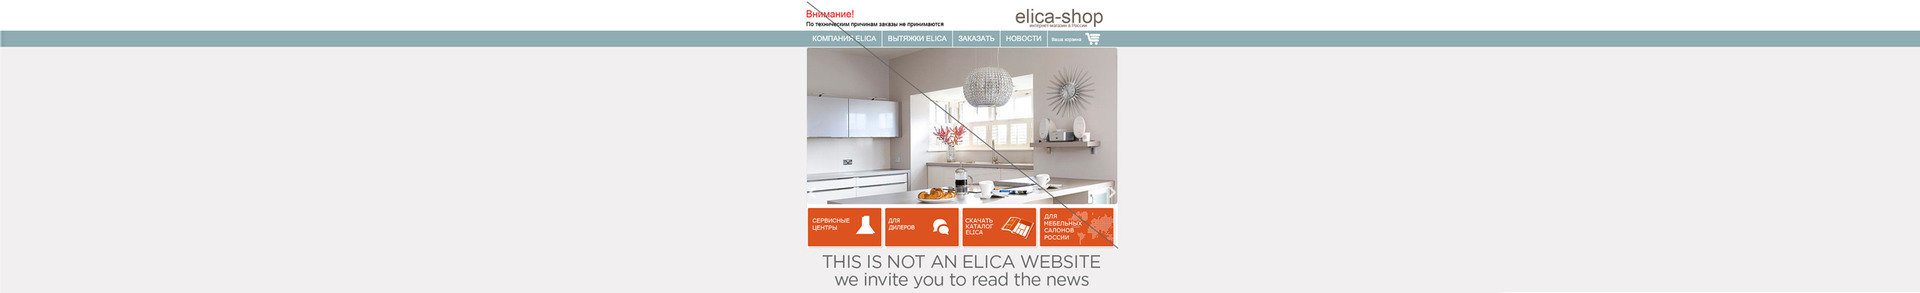 Information letter: Warning about not official Elica site